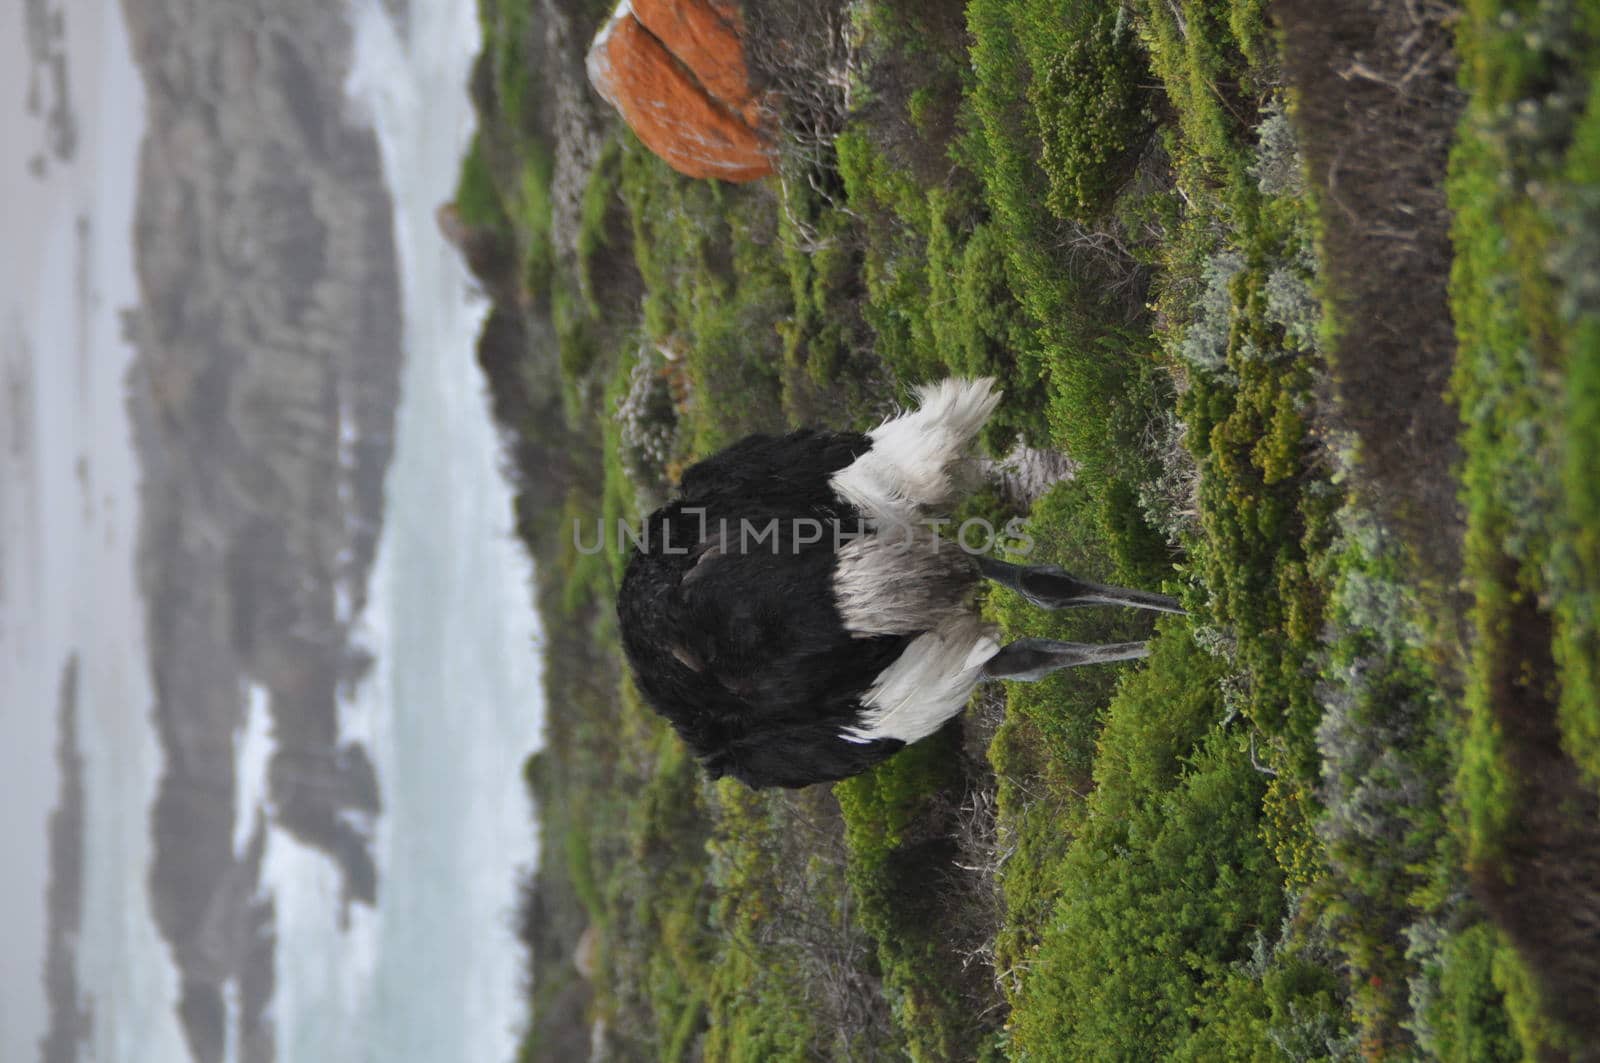 Ostrich near the cape of good hope, the ocean in the background,a big rock, on the right side